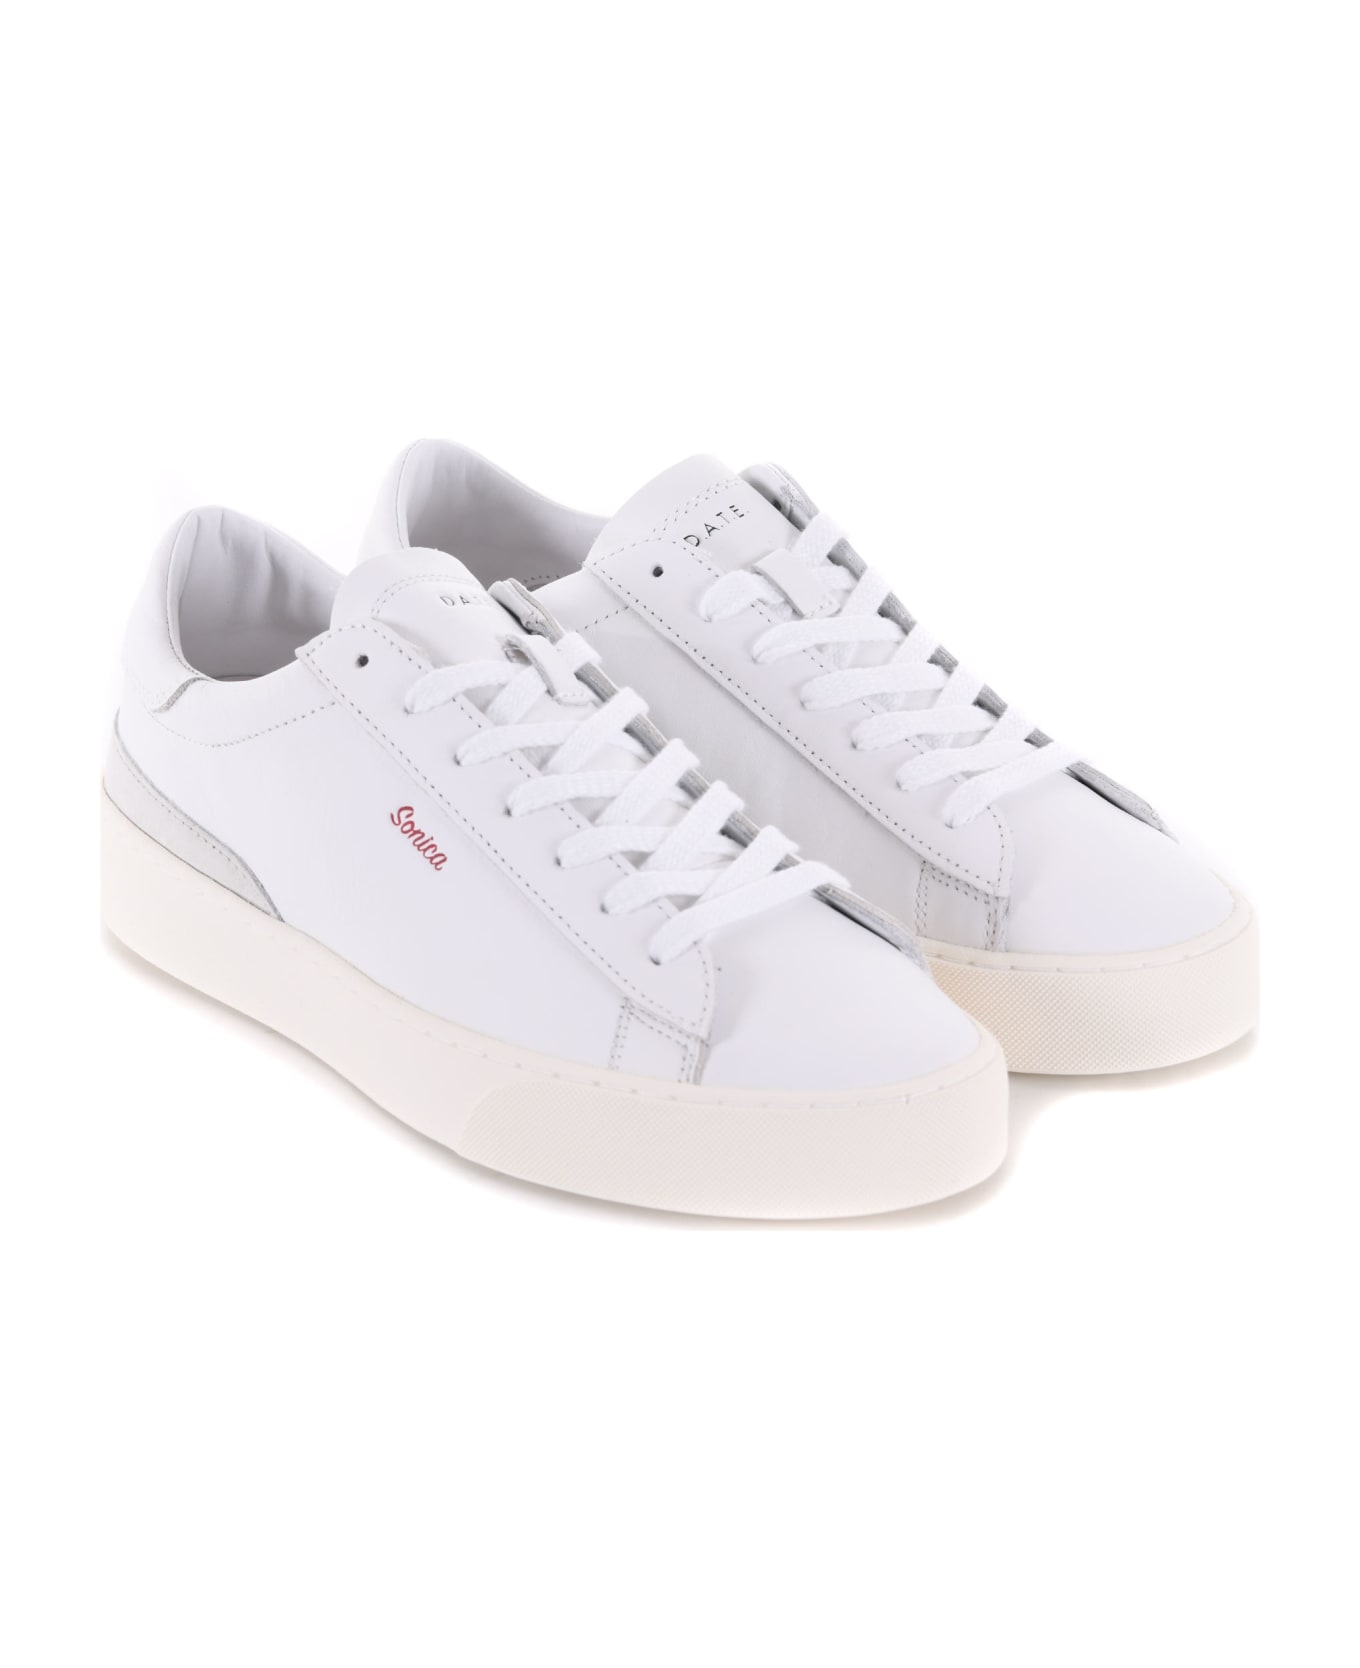 D.A.T.E. Men's Sneakers Leather. - Bianco